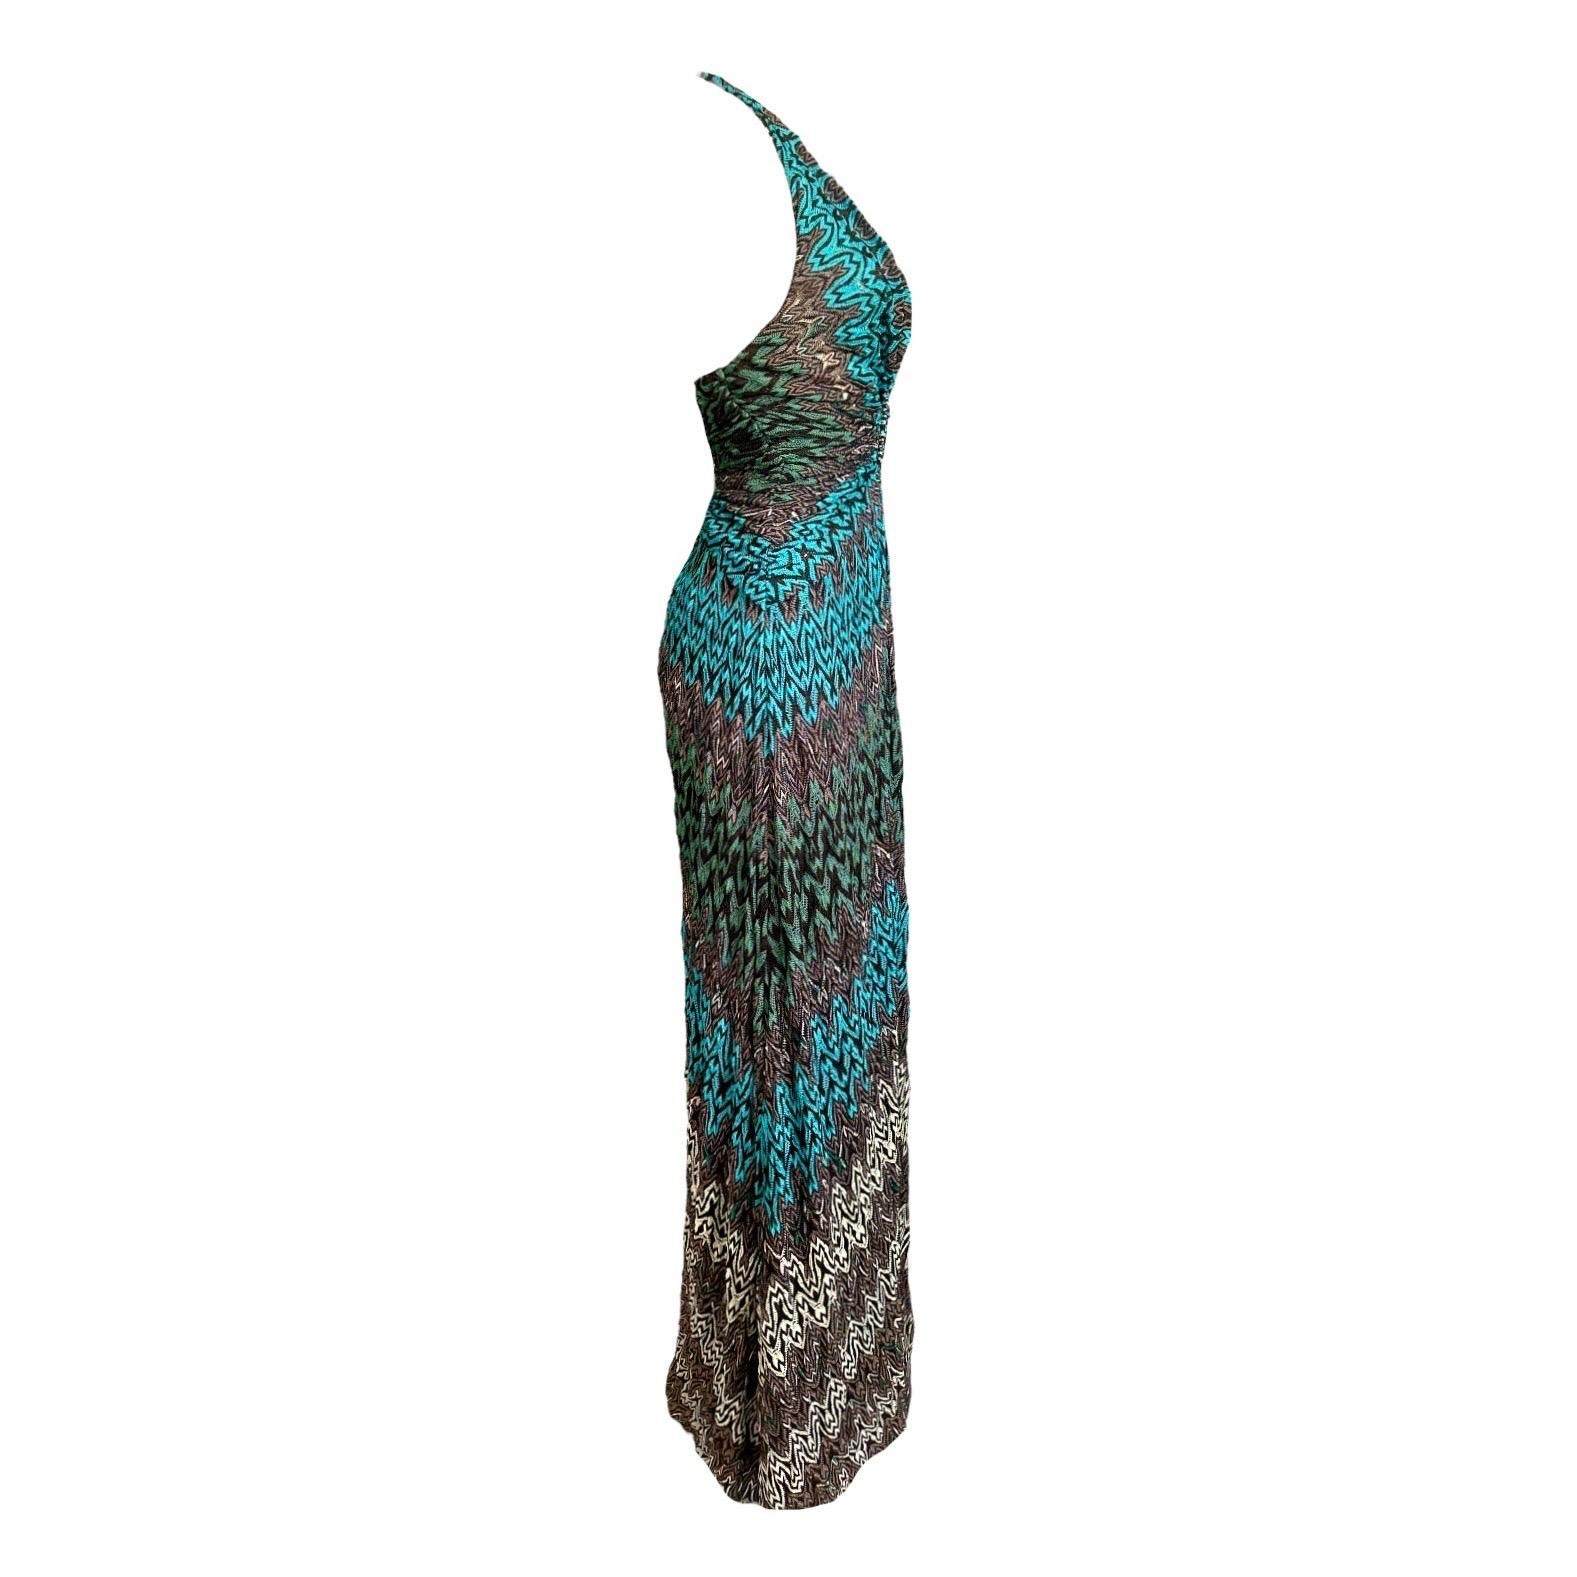 A very unique and sexy evening gown by Missoni - make an entrance with this stunning piece!

DETAILS:

A fantastic Missoni Crochet Knit Evening Gown Ensemble
Consisting of 2 pieces - the gown and matching cardigan
MISSONI main line
Classic MISSONI